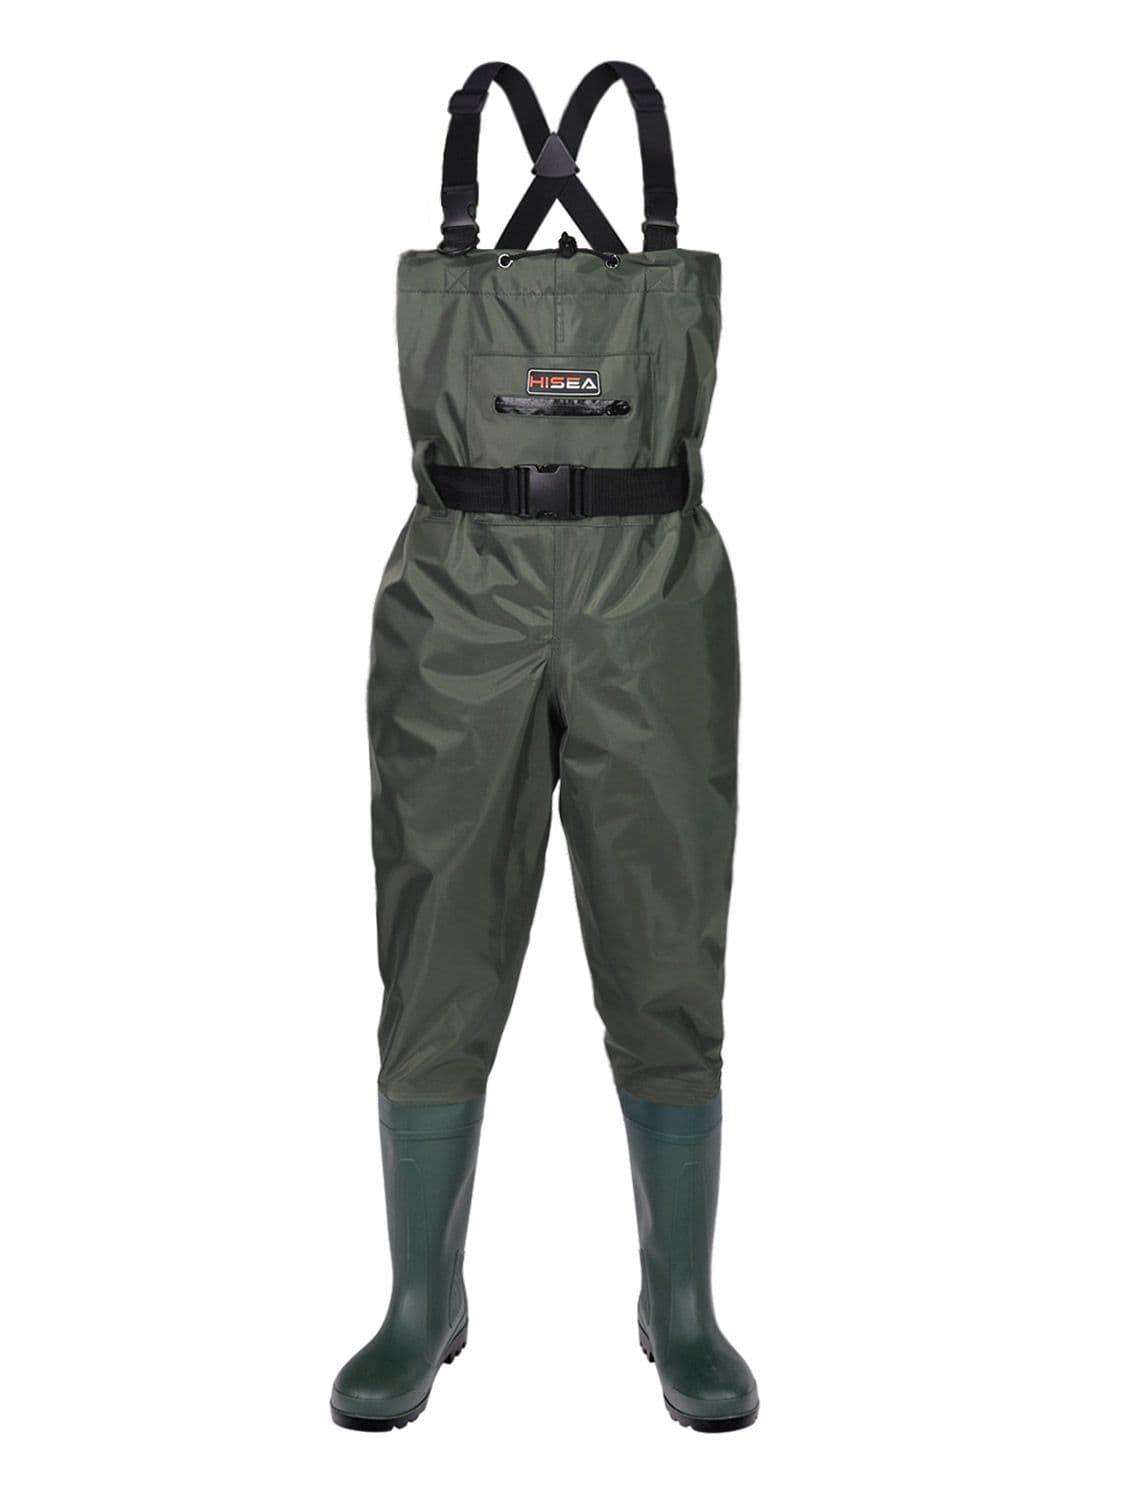 Kids Chest Waders Youth Fishing Waders For Toddler Children Water Proof  Hunting Waders With Baby Organic (AG, 5-6 Years) : Sports & Outdoors 